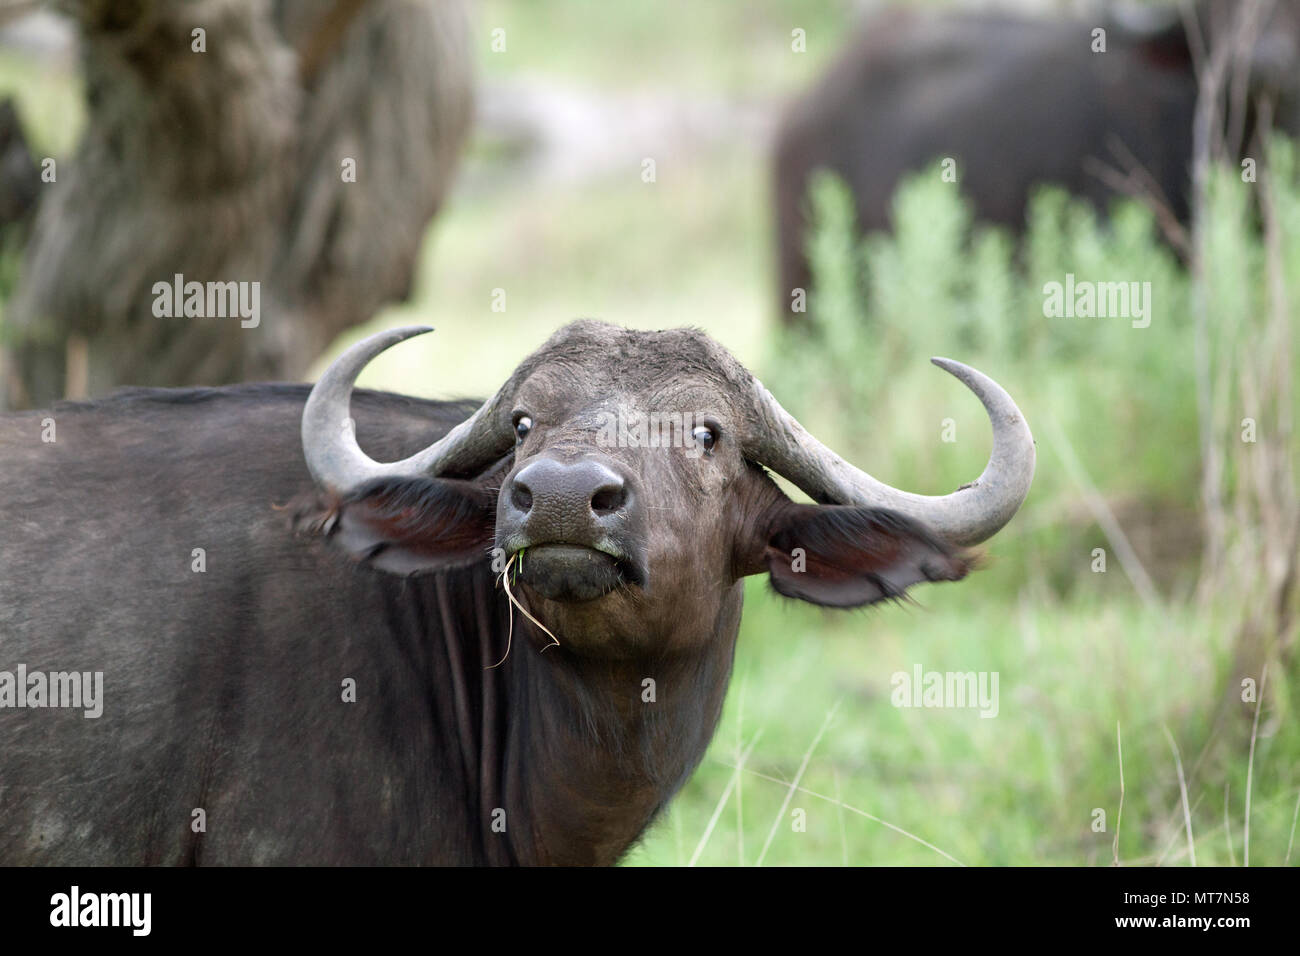 African Buffalo (Syncerus caffer). Female or Cow. Short-sighted, whites of eyes showing. The sense of smell good. Eat coarse, old grass and in doing so revealing shorter grasses for smaller herbivores. Stock Photo